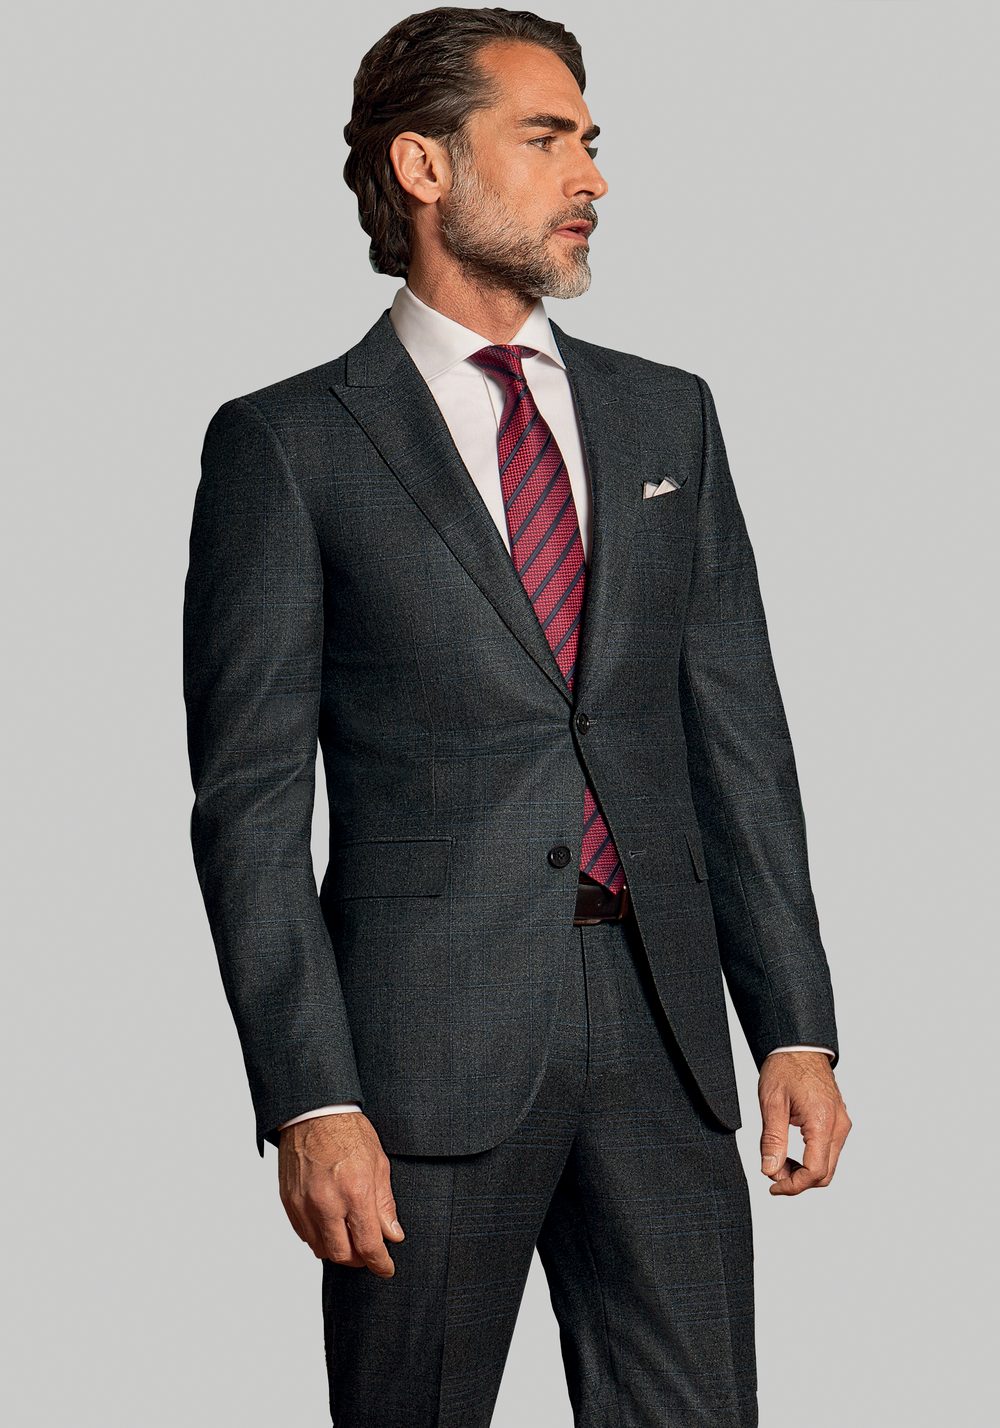 Custom Suits by Label New York - Label Custom Clothing